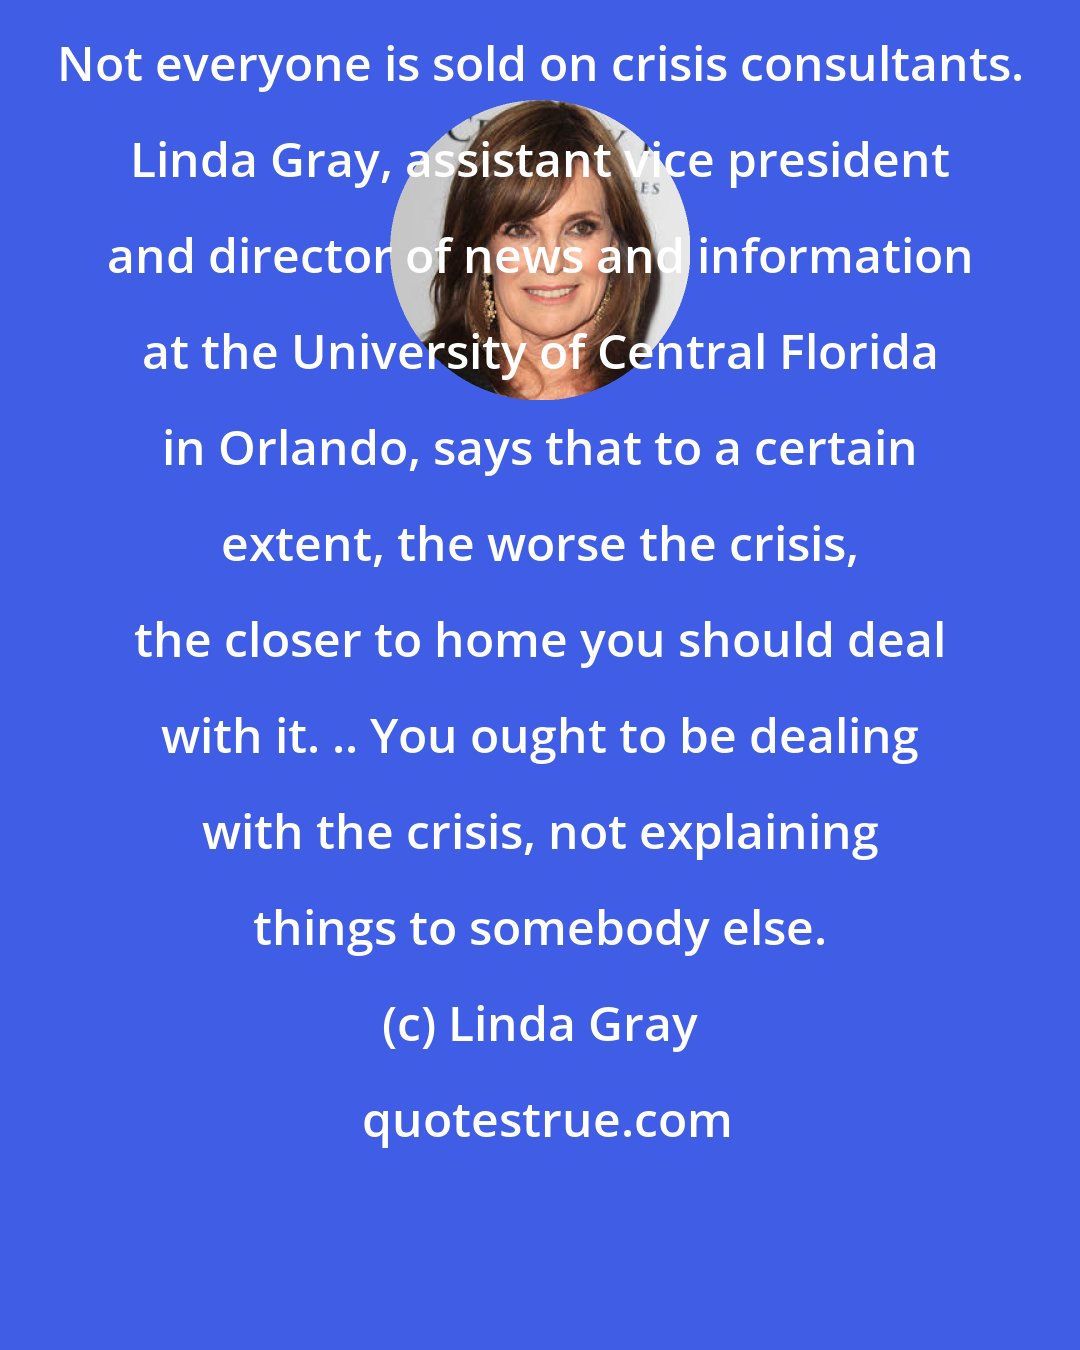 Linda Gray: Not everyone is sold on crisis consultants. Linda Gray, assistant vice president and director of news and information at the University of Central Florida in Orlando, says that to a certain extent, the worse the crisis, the closer to home you should deal with it. .. You ought to be dealing with the crisis, not explaining things to somebody else.